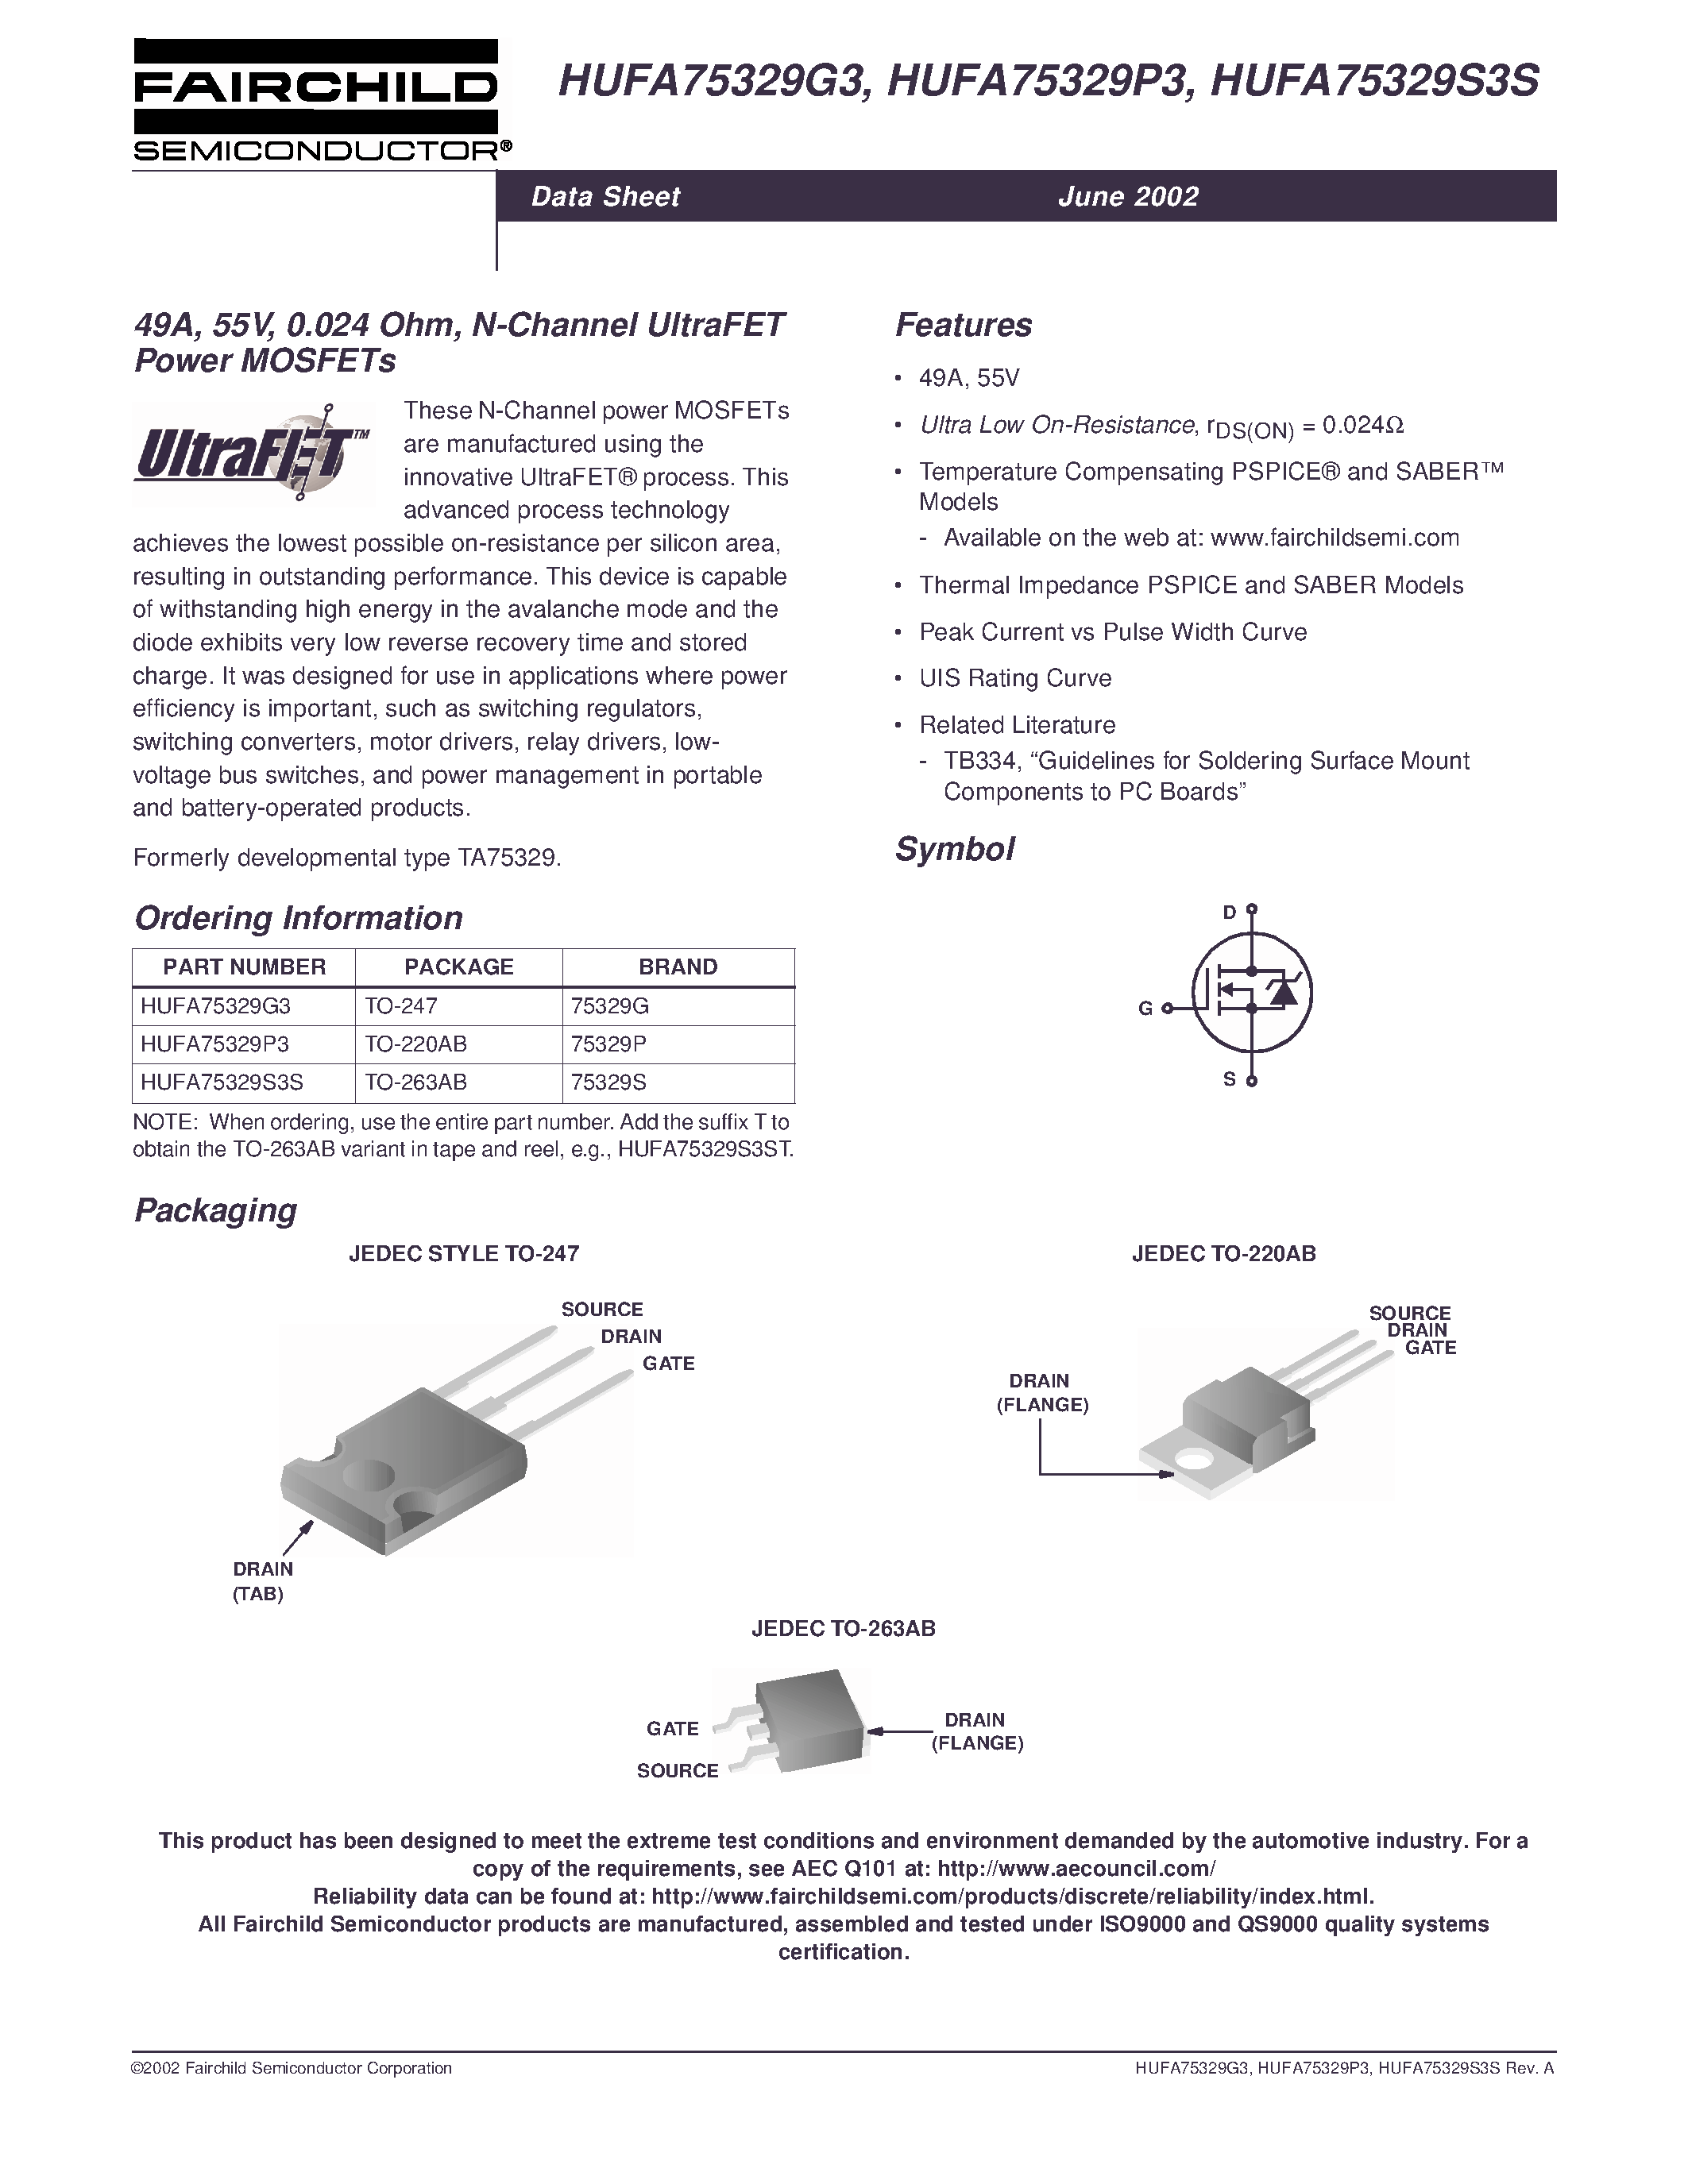 Datasheet HUFA75329D3S - 20A/ 55V/ 0.026 Ohm/ N-Channel UltraFET Power MOSFETs page 1